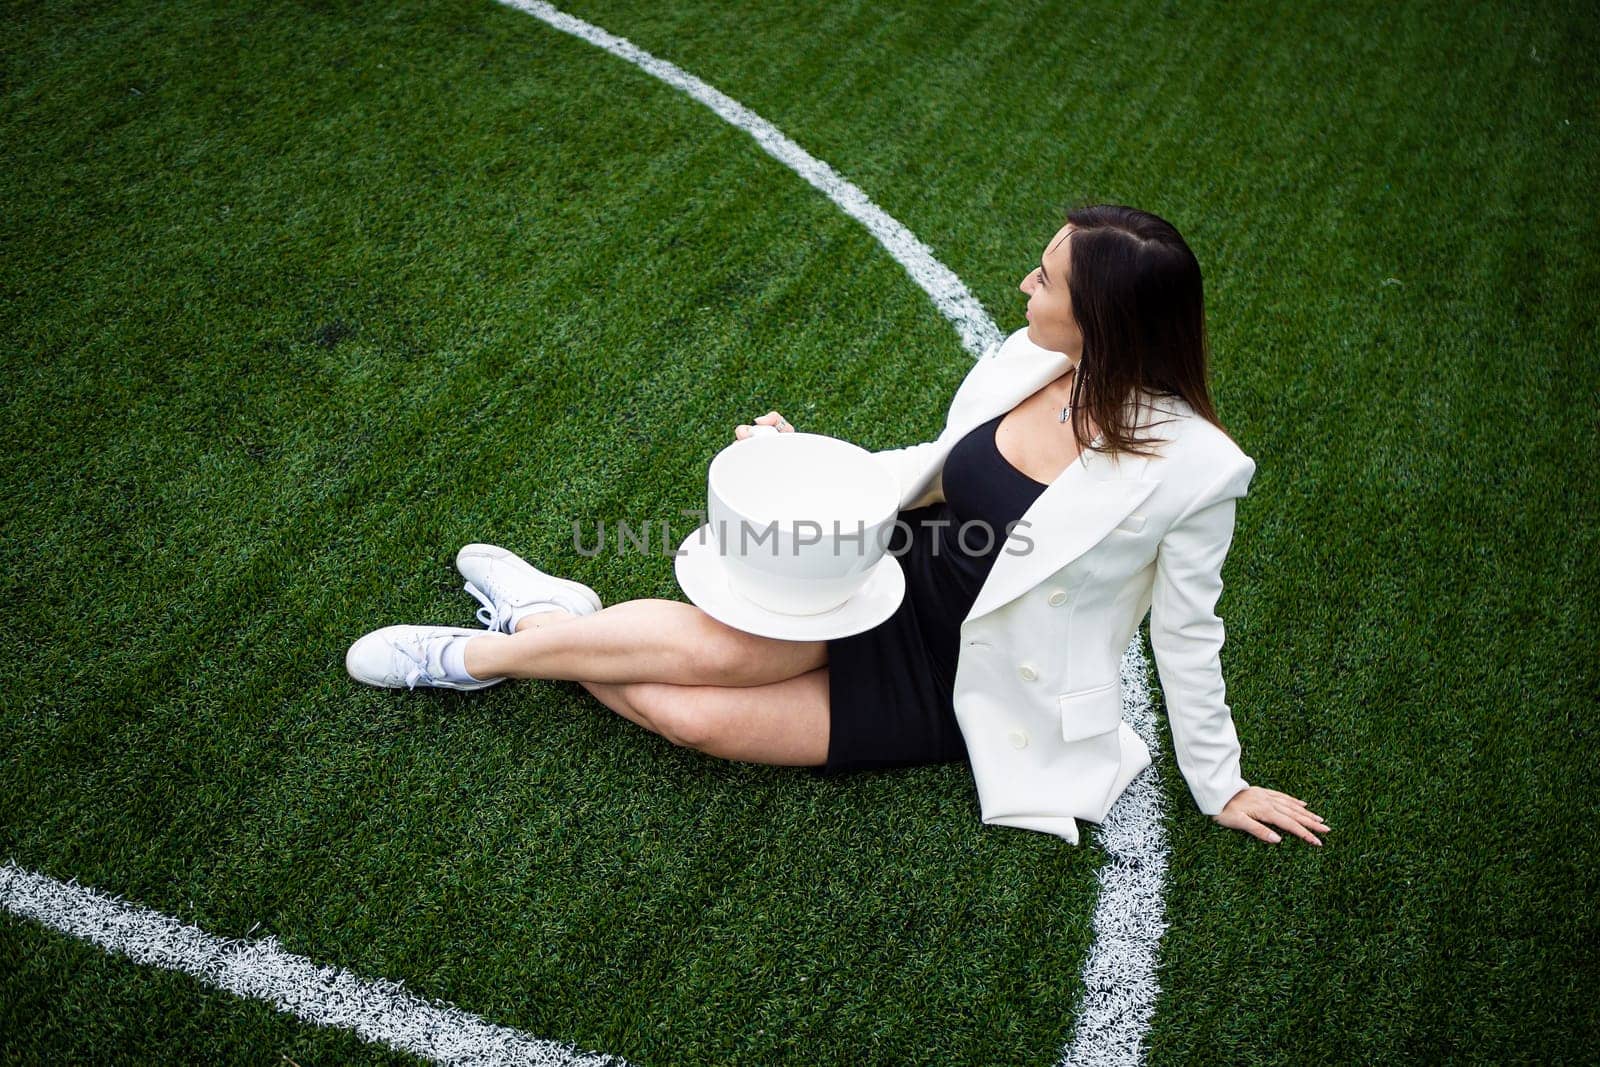 A business woman with a large cup, sitting on a green lawn in the park. by Evgenii_Leontev